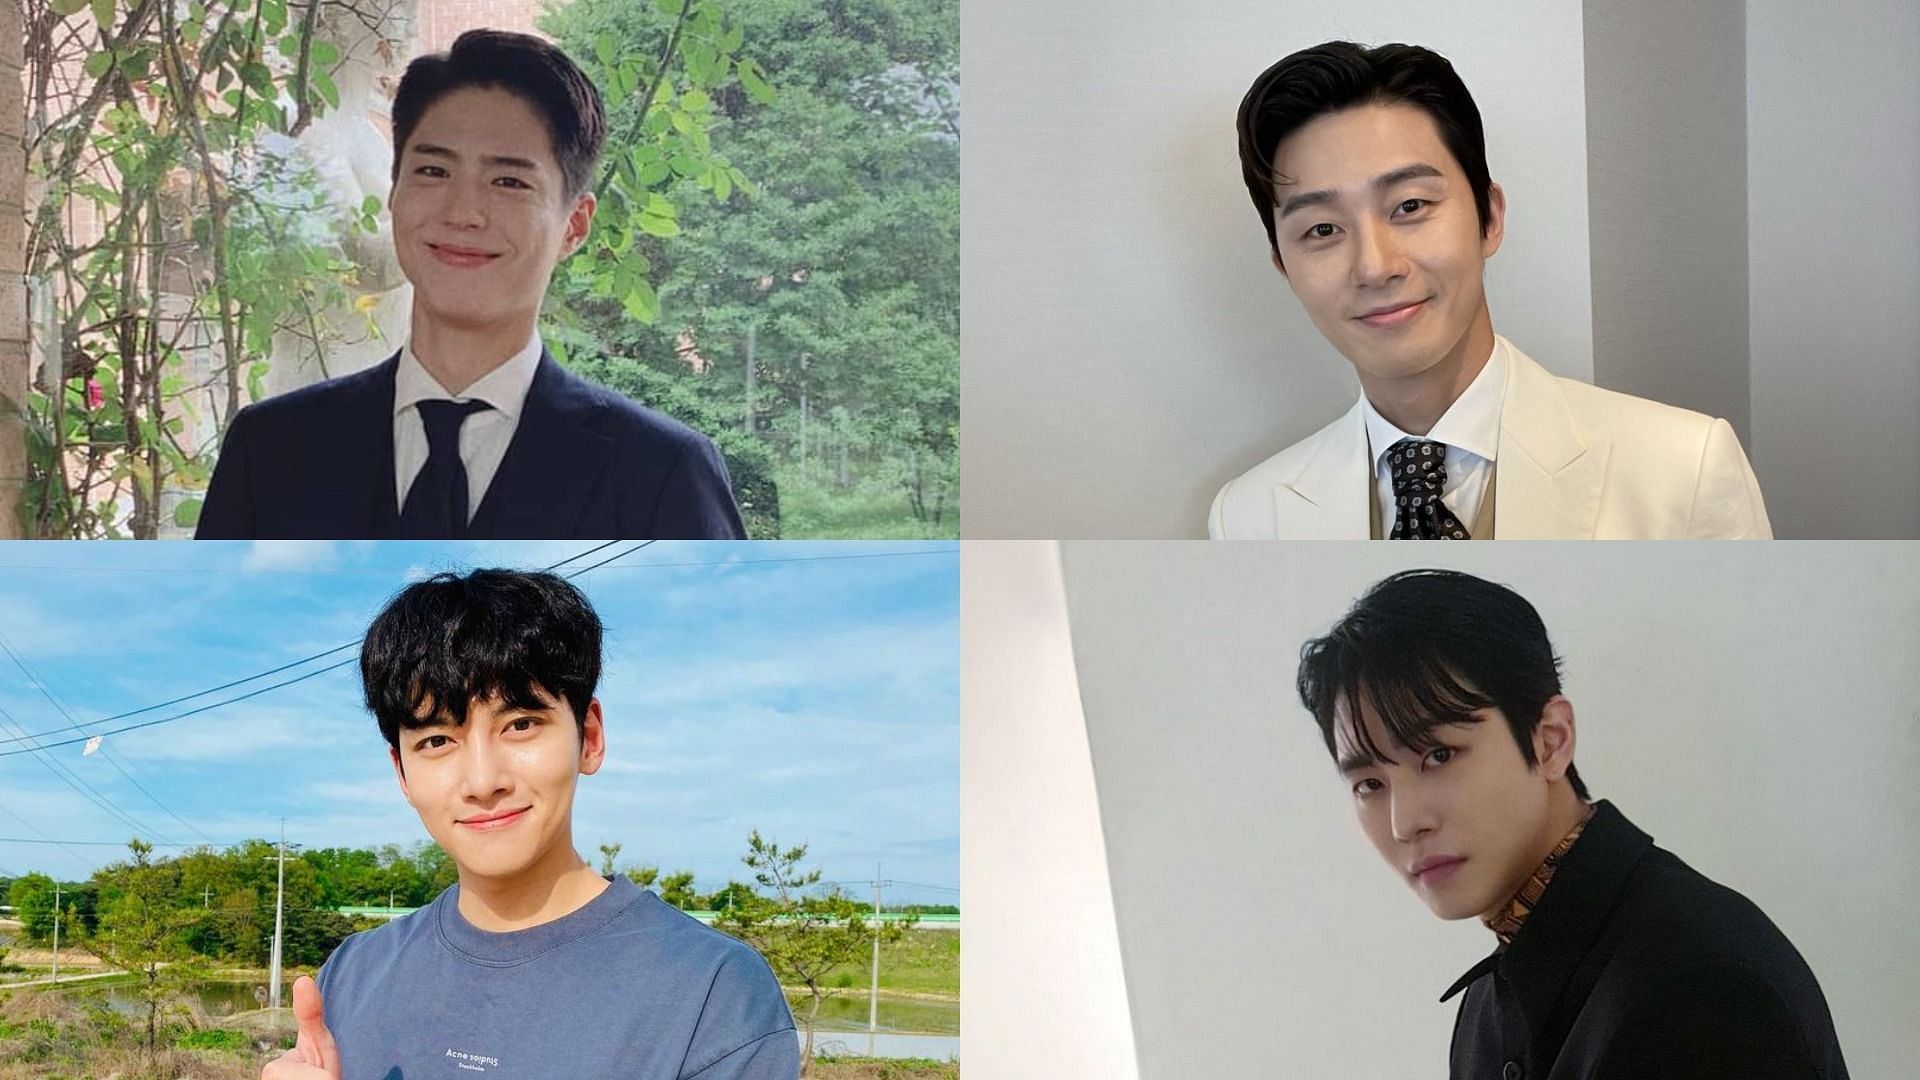 Clockwise: Park Bo-gum, Park Seo-joon, Ahn Hyo-seop and Ji Chang-wook approached for a new variety show (Images via @imhyoseop, @jichangwook, @bn_sj2013, and @parkb0gum on Instagram)